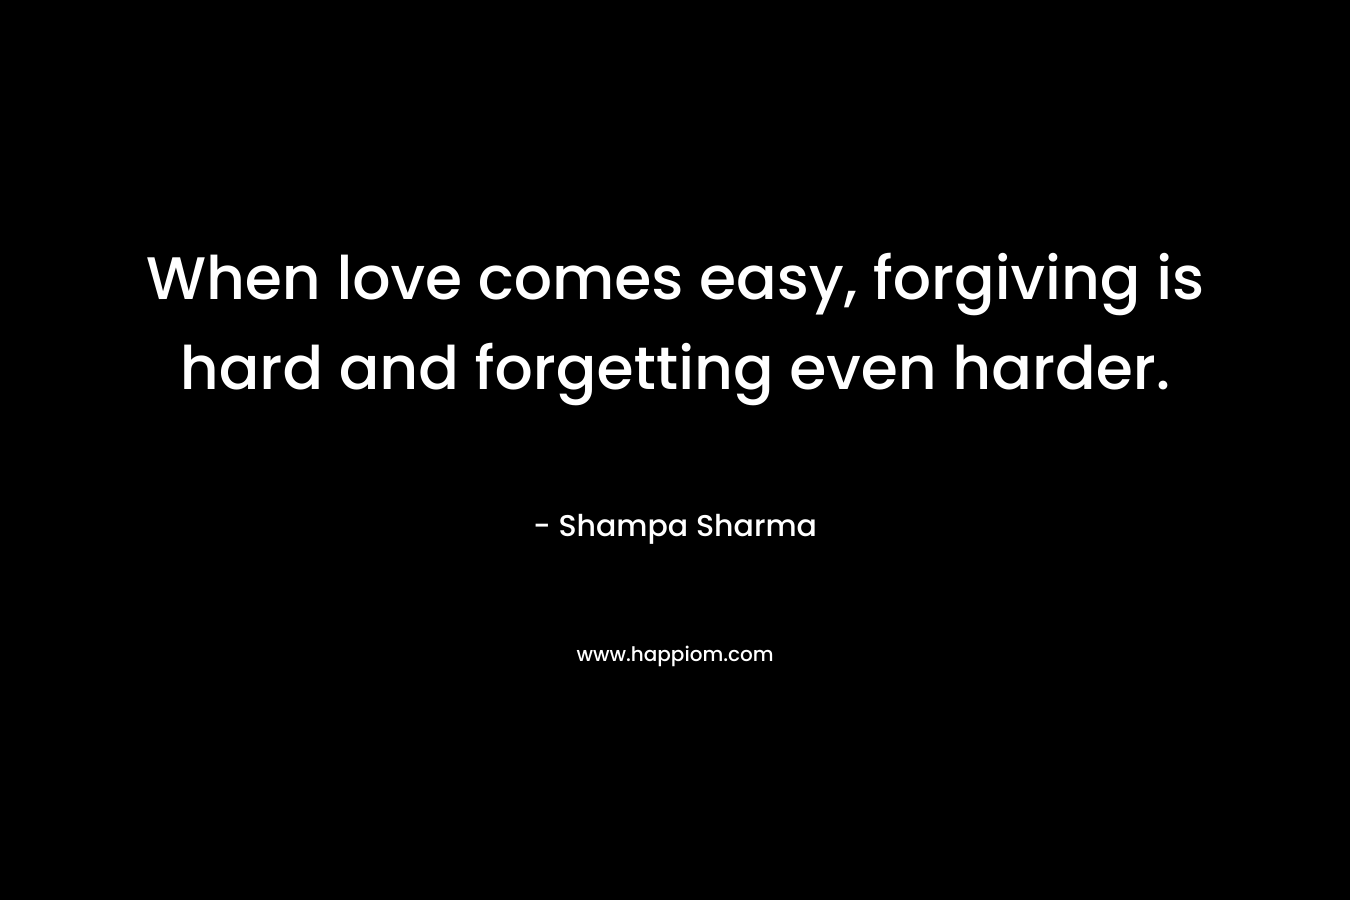 When love comes easy, forgiving is hard and forgetting even harder.